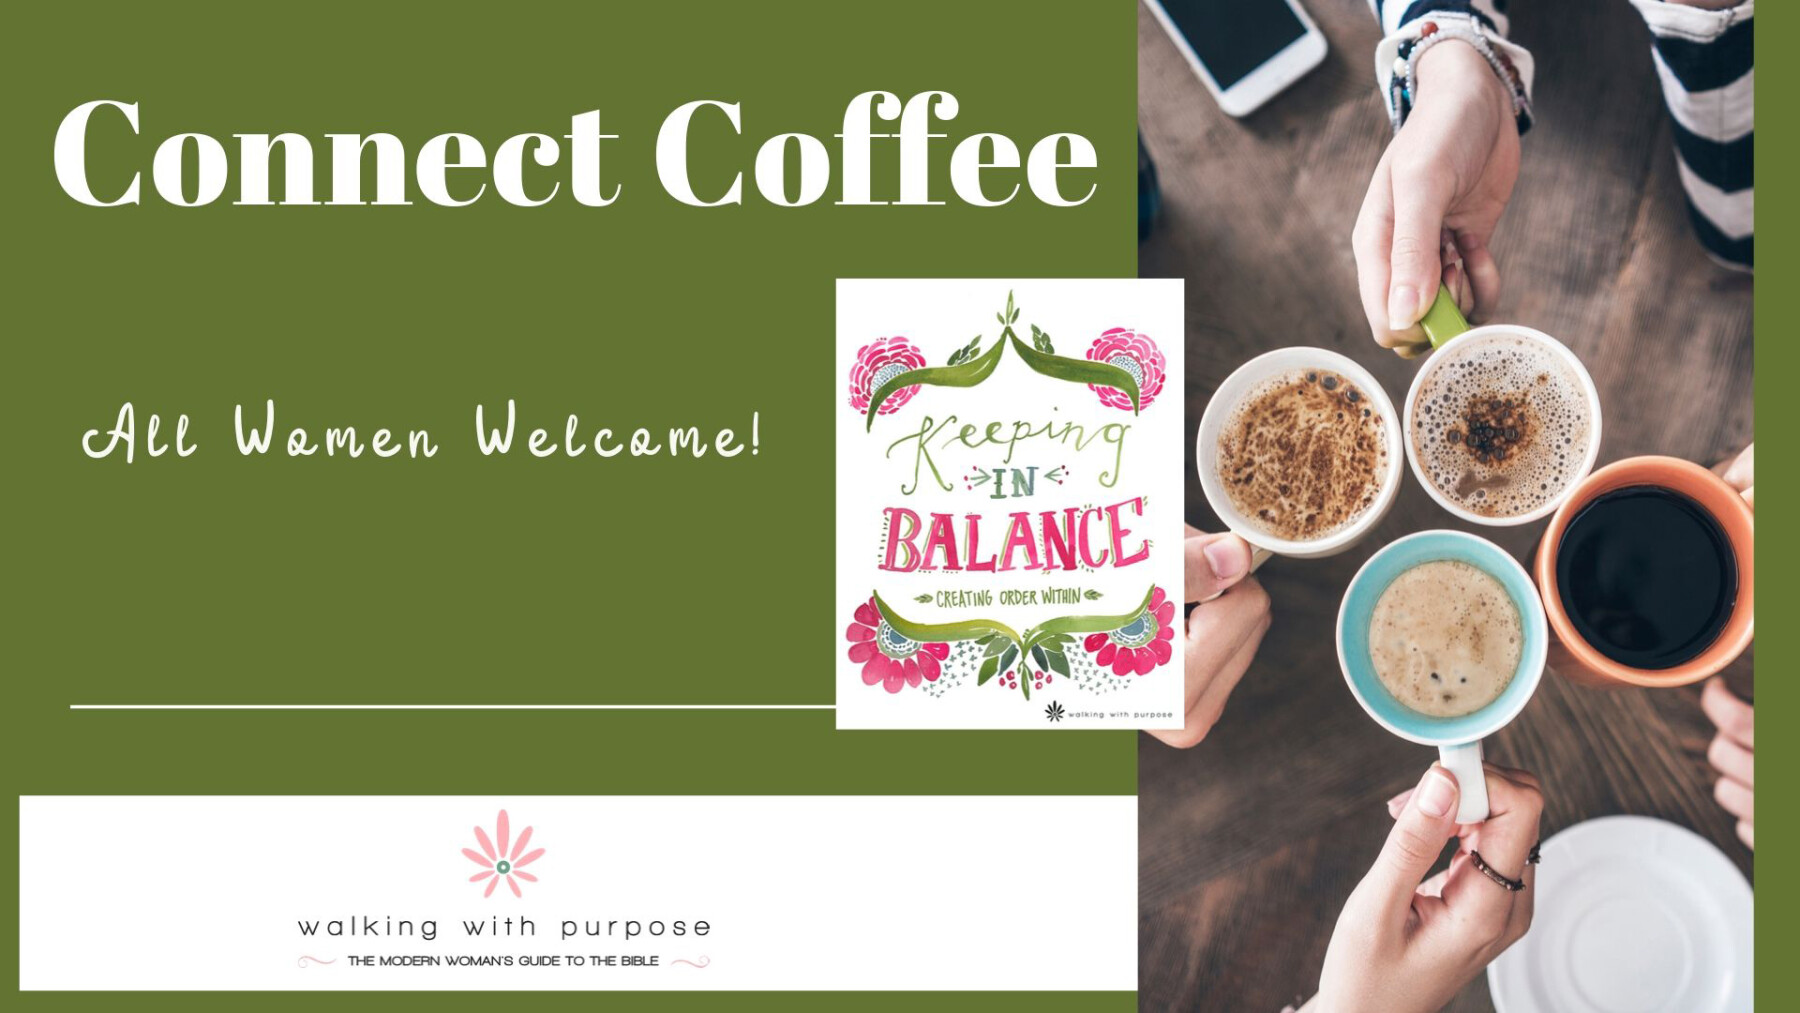 Connect Coffee - Keeping in Balance